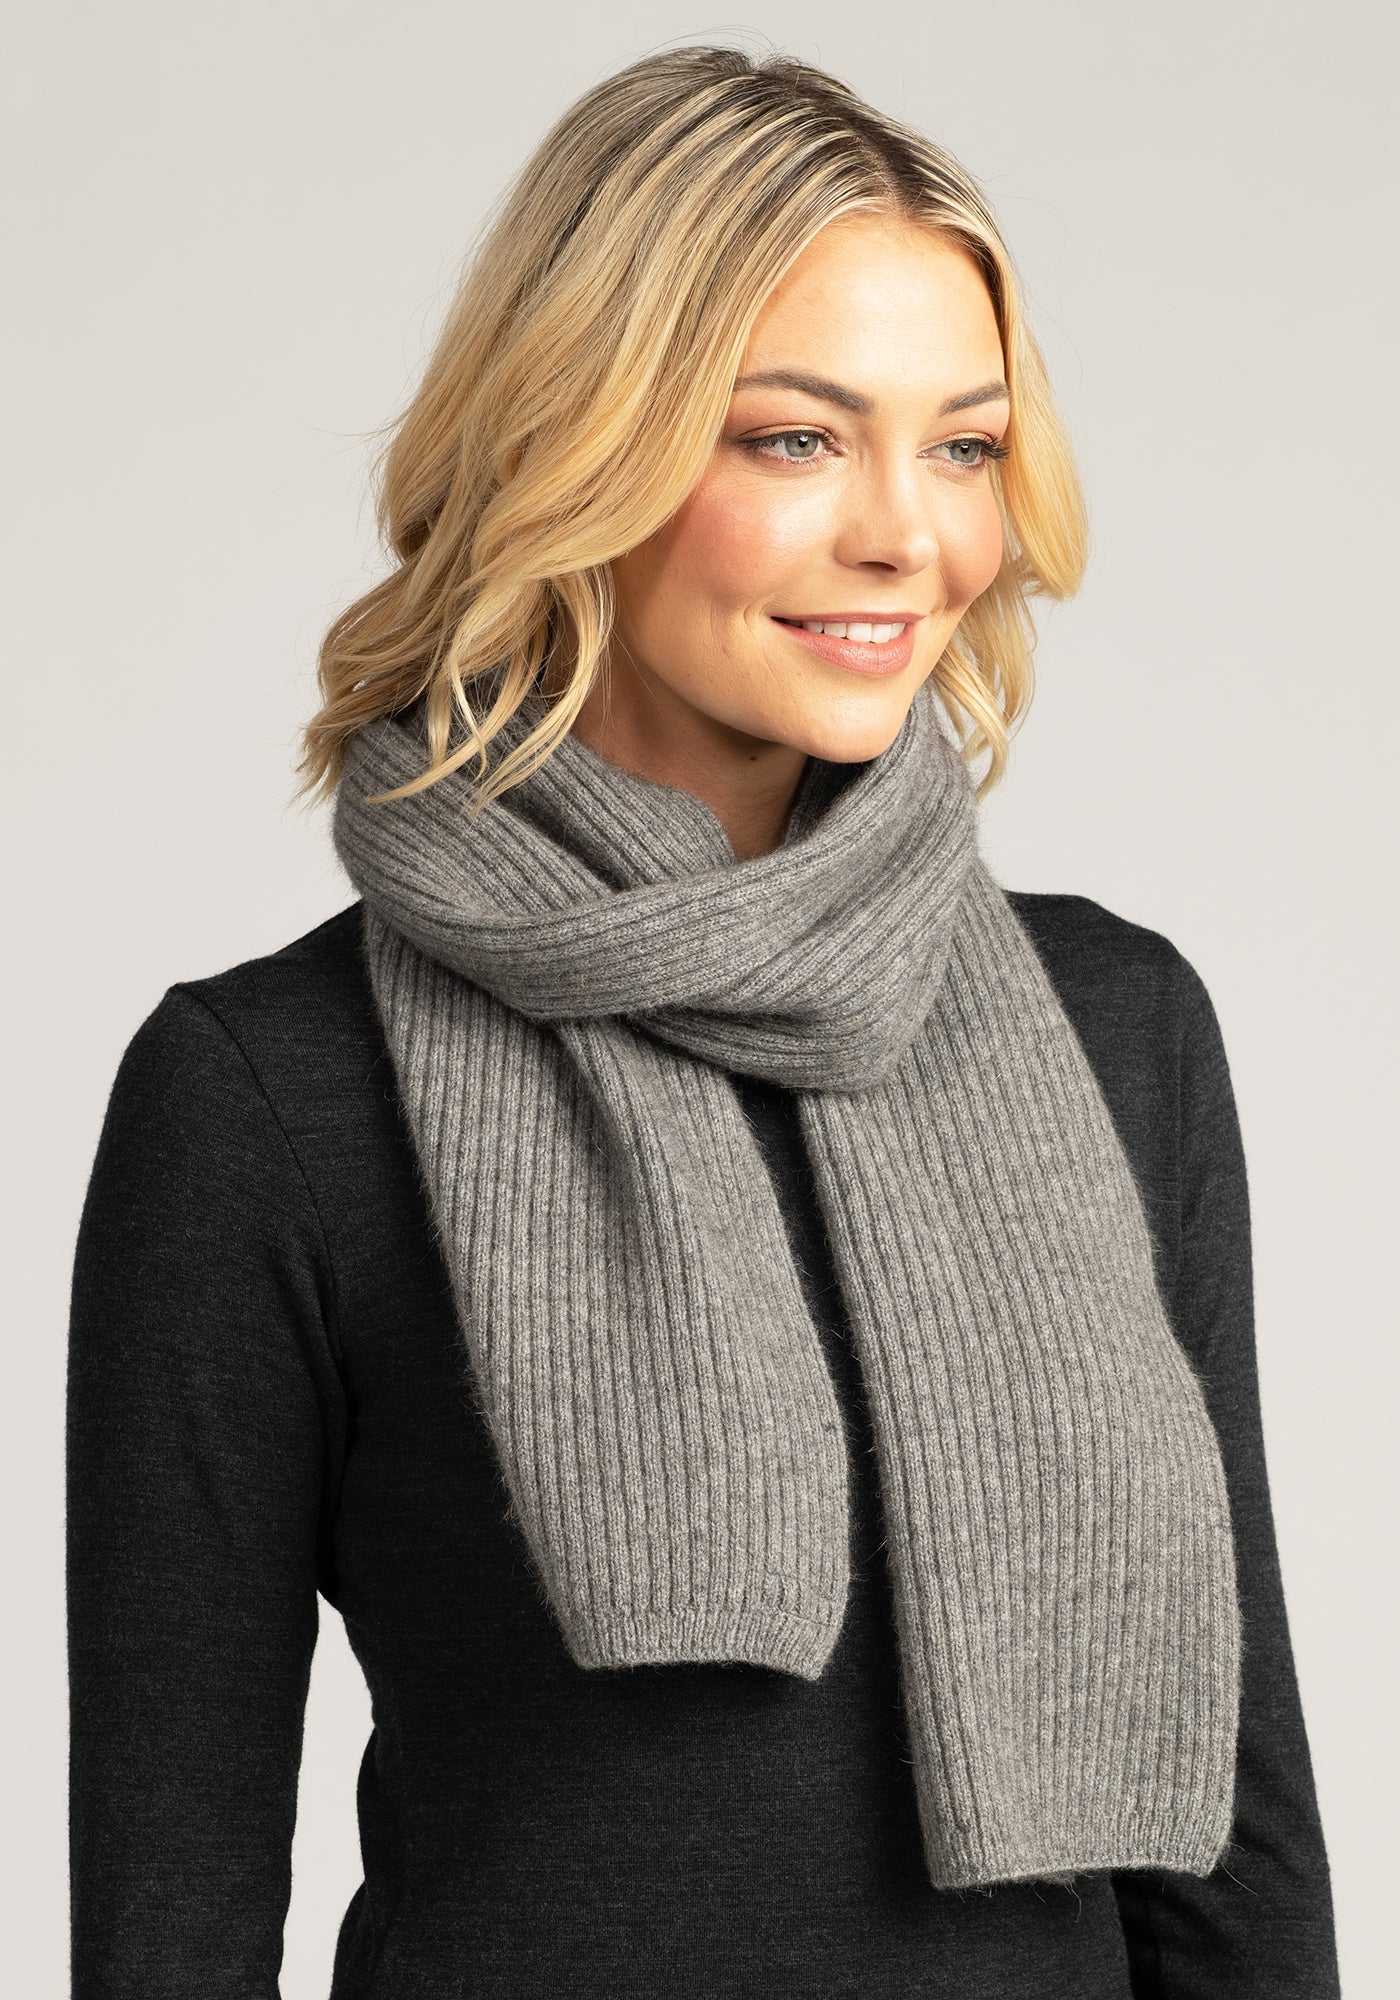 Wrap up in luxury with our grey merino wool ribbed scarf. Soft, stylish, and perfect for chilly days. Shop now!